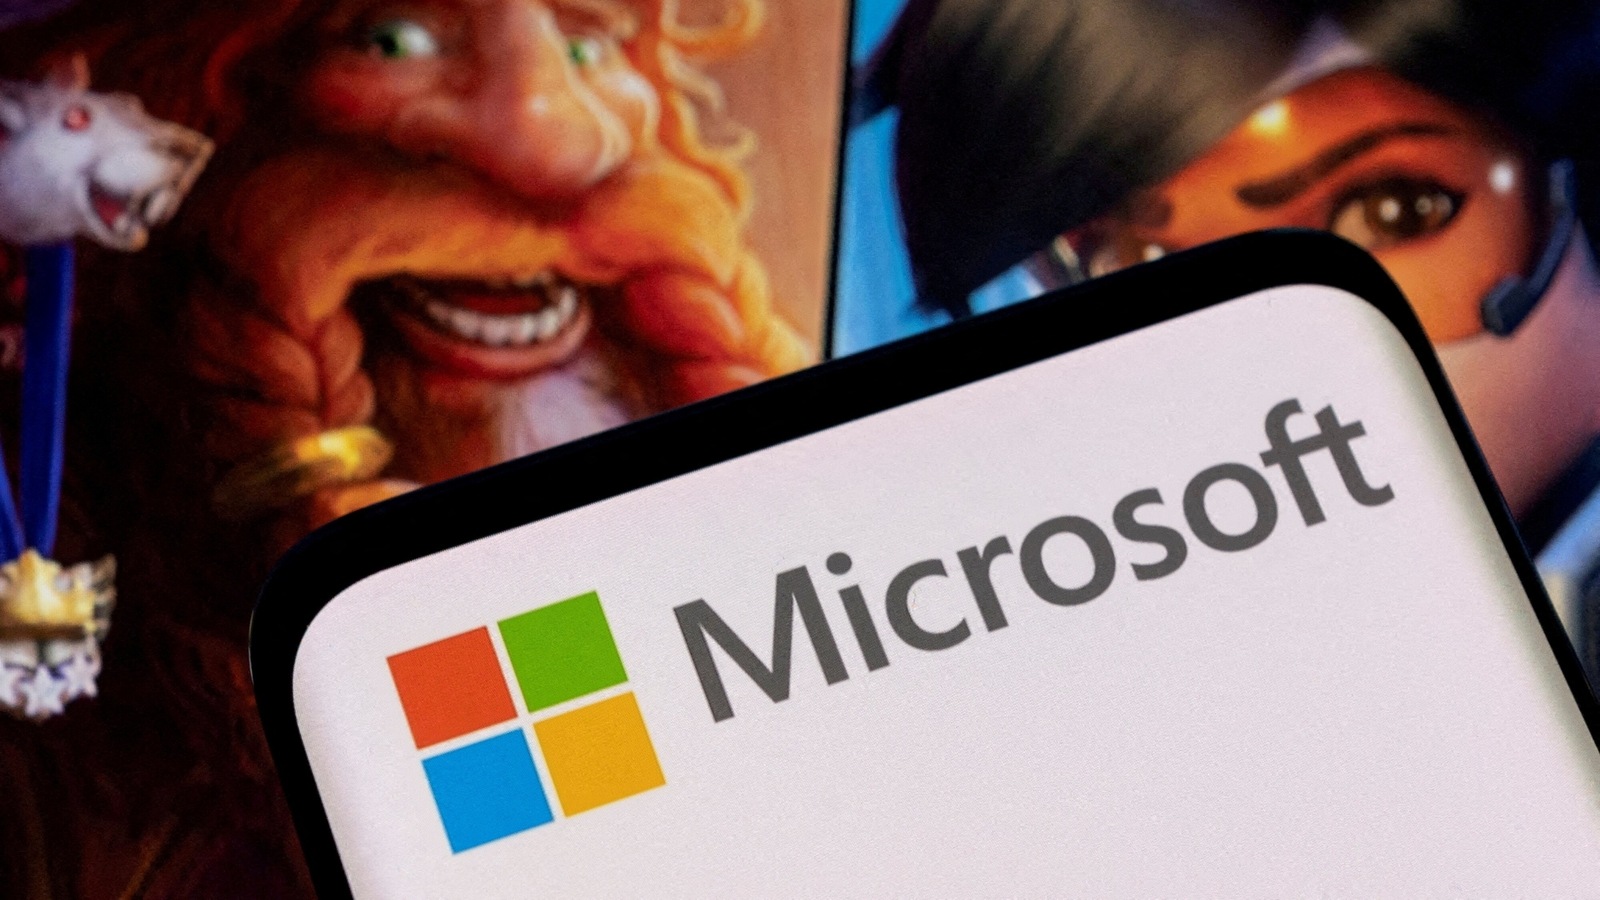 Microsoft signs 10-year deal with Nware after UK blocks Activision deal